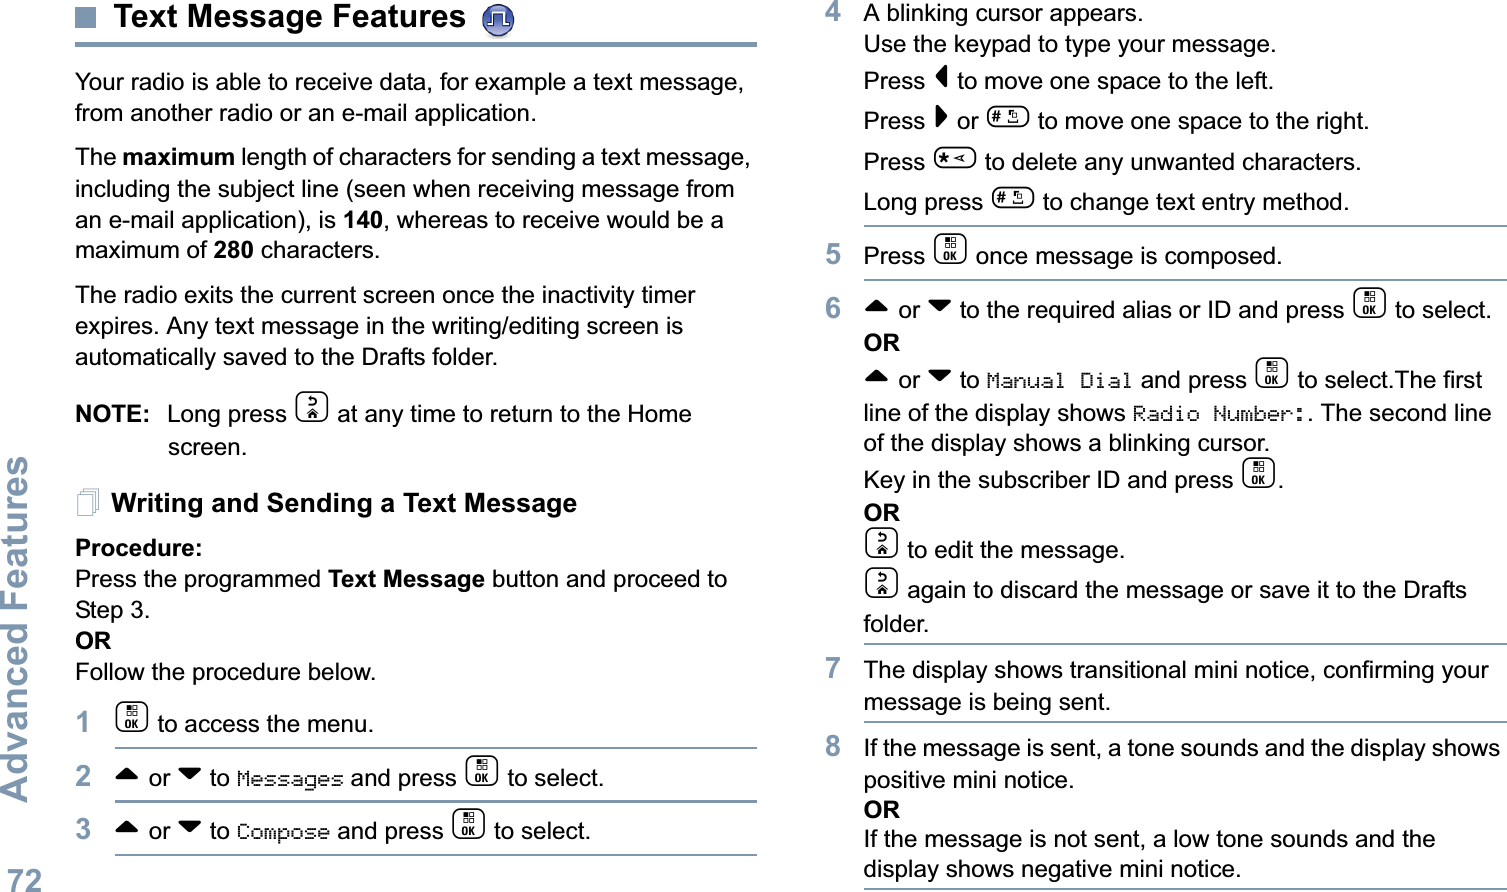 Advanced FeaturesEnglish72Text Message Features Your radio is able to receive data, for example a text message, from another radio or an e-mail application.The maximum length of characters for sending a text message, including the subject line (seen when receiving message from an e-mail application), is 140, whereas to receive would be a maximum of 280 characters. The radio exits the current screen once the inactivity timer expires. Any text message in the writing/editing screen is automatically saved to the Drafts folder.NOTE: Long press d at any time to return to the Home screen.Writing and Sending a Text MessageProcedure:Press the programmed Text Message button and proceed to Step 3.ORFollow the procedure below.1c to access the menu.2^ or v to Messages and press c to select.3^ or v to Compose and press c to select.4A blinking cursor appears. Use the keypad to type your message.Press &lt; to move one space to the left. Press &gt; or # to move one space to the right.Press * to delete any unwanted characters.Long press # to change text entry method.5Press c once message is composed.6^ or v to the required alias or ID and press c to select.OR^ or v to Manual Dial and press c to select.The first line of the display shows Radio Number:. The second line of the display shows a blinking cursor. Key in the subscriber ID and press c.ORd to edit the message.d again to discard the message or save it to the Drafts folder.7The display shows transitional mini notice, confirming your message is being sent.8If the message is sent, a tone sounds and the display shows positive mini notice.ORIf the message is not sent, a low tone sounds and the display shows negative mini notice.